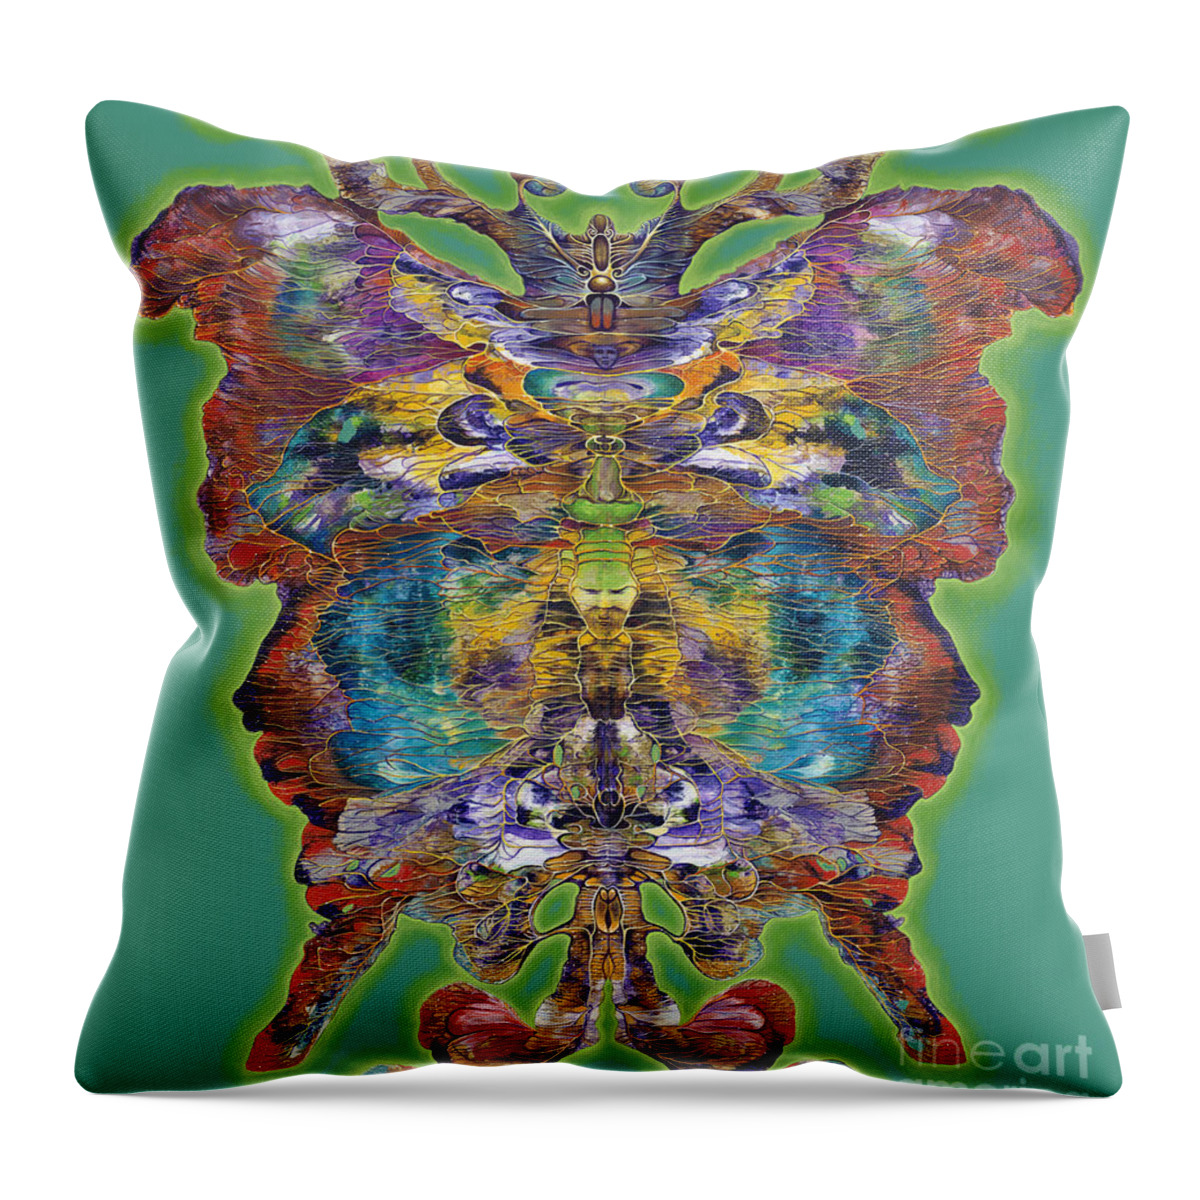 Butterfly Throw Pillow featuring the painting Papalotl Series Vlll by Ricardo Chavez-Mendez